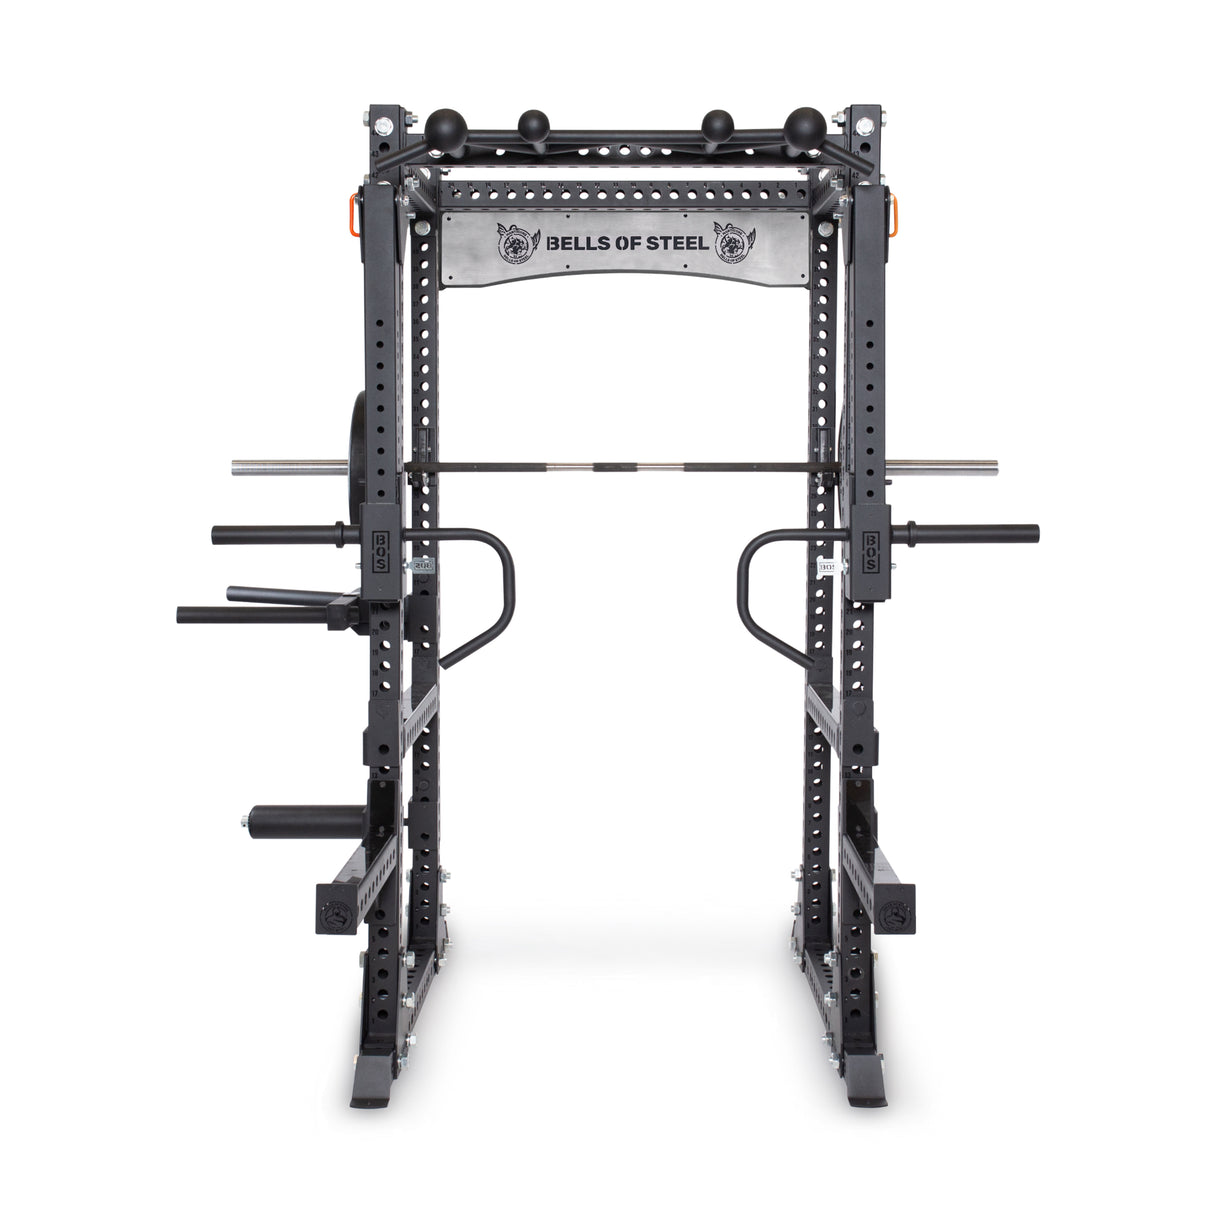 product picture of Manticore Flat Foot Power Rack PREBUILT with attachments front view